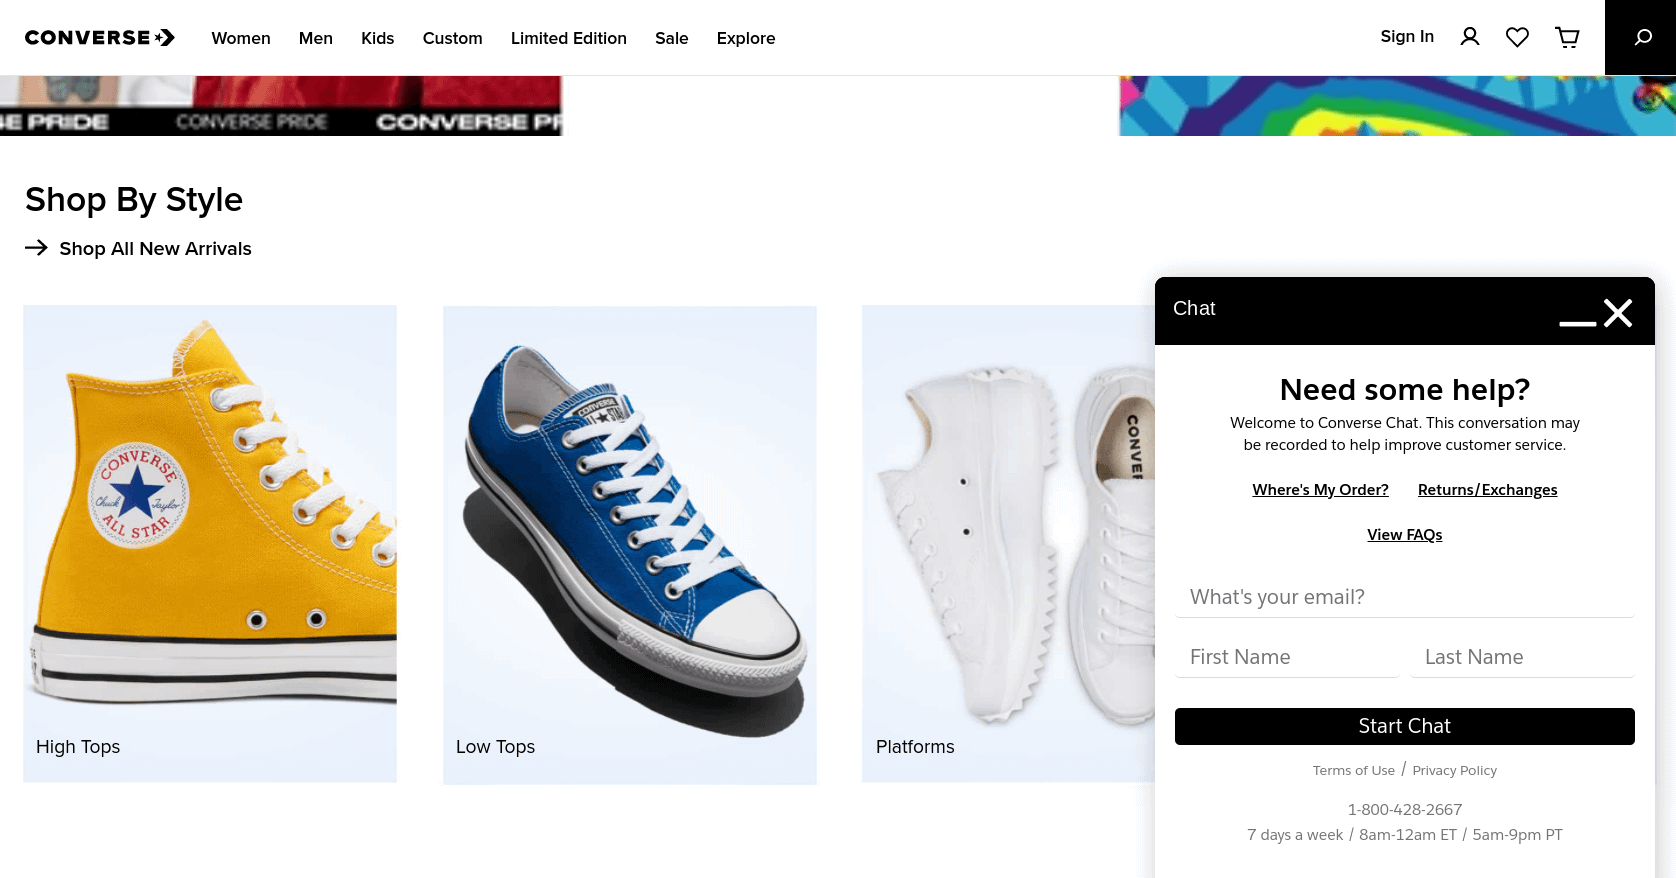 An example of an eCommerce chatbot on the Converse website.